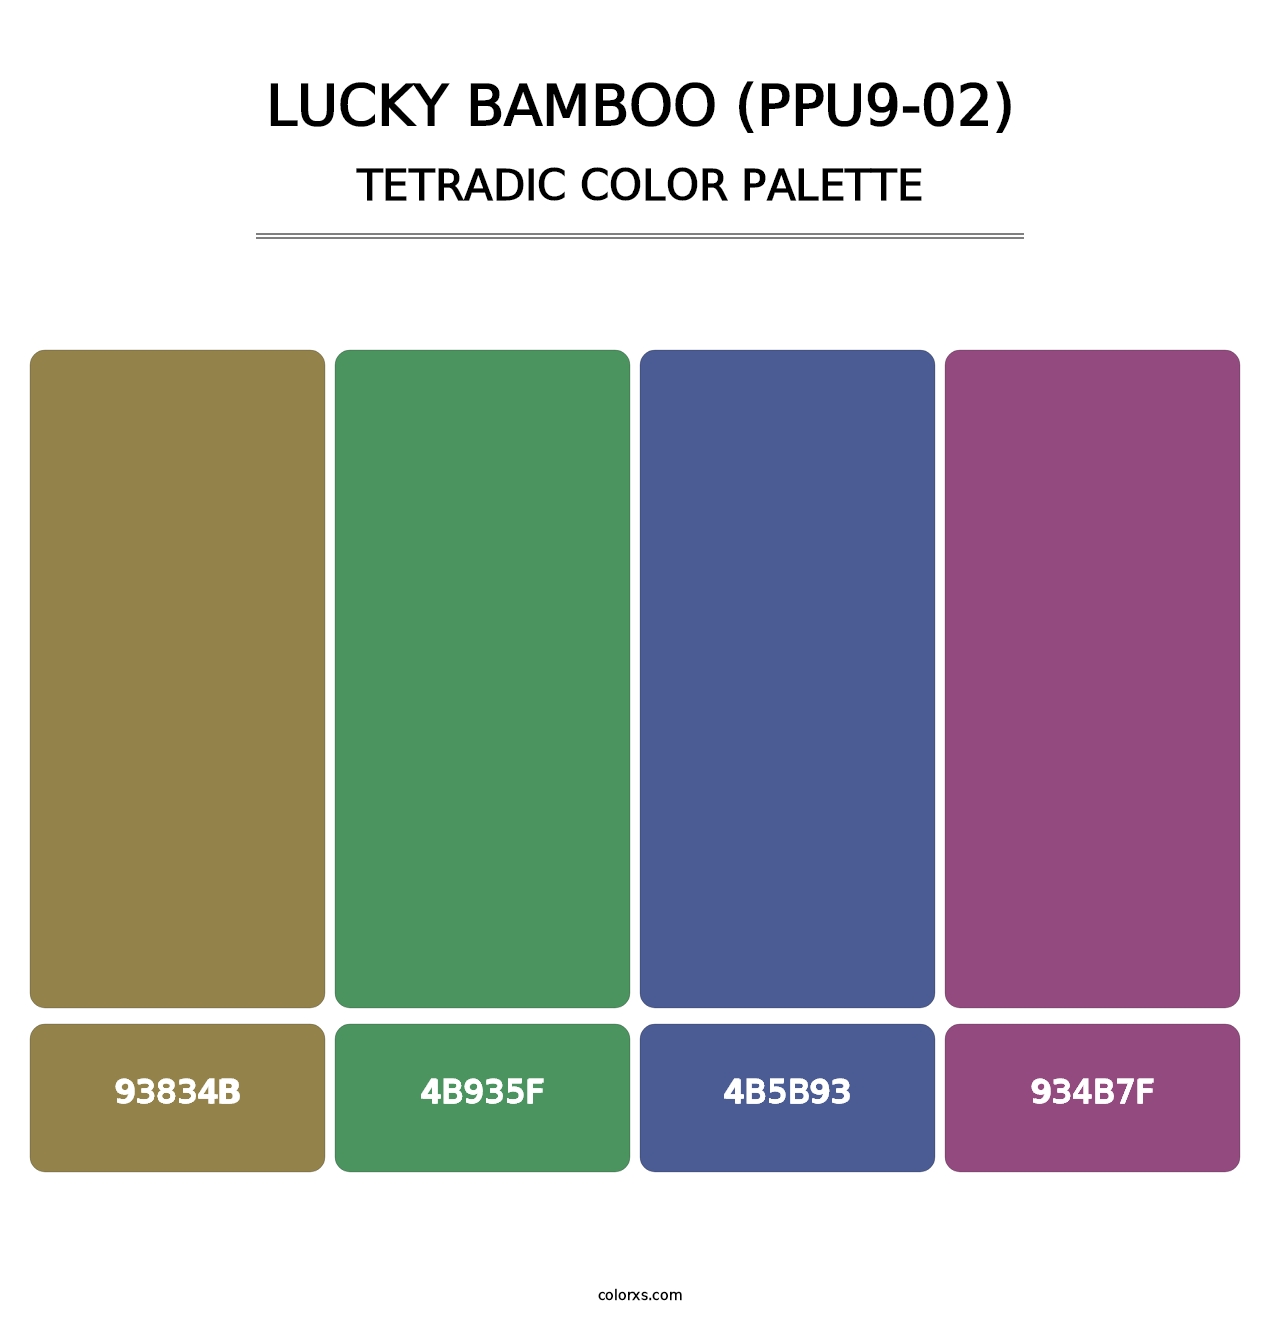 Lucky Bamboo (PPU9-02) - Tetradic Color Palette